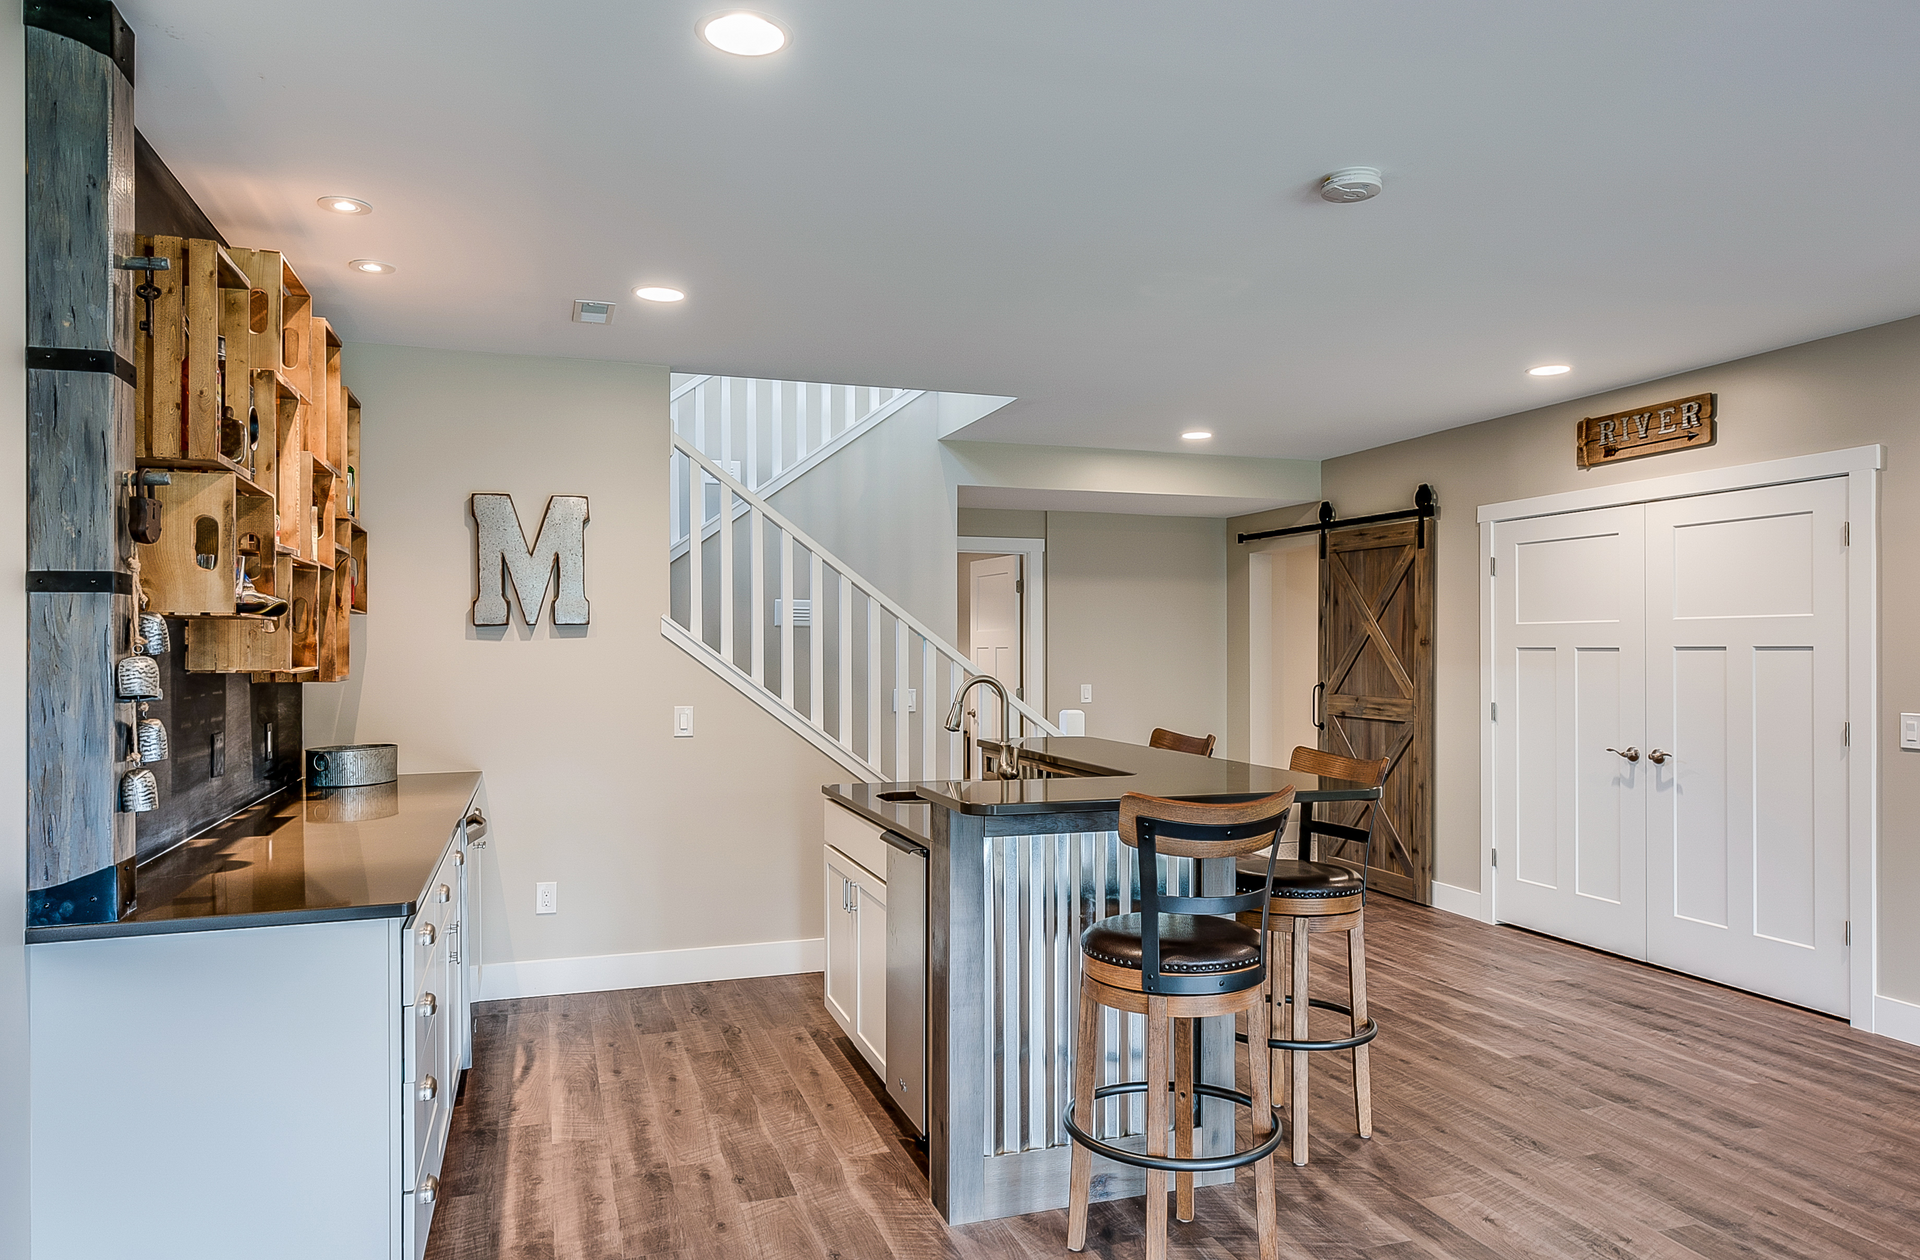 Basement remodeled by compass construction turning it into a modern lavish den and bar area with barn style sliding doors, bar stools, and gorgeous staircase